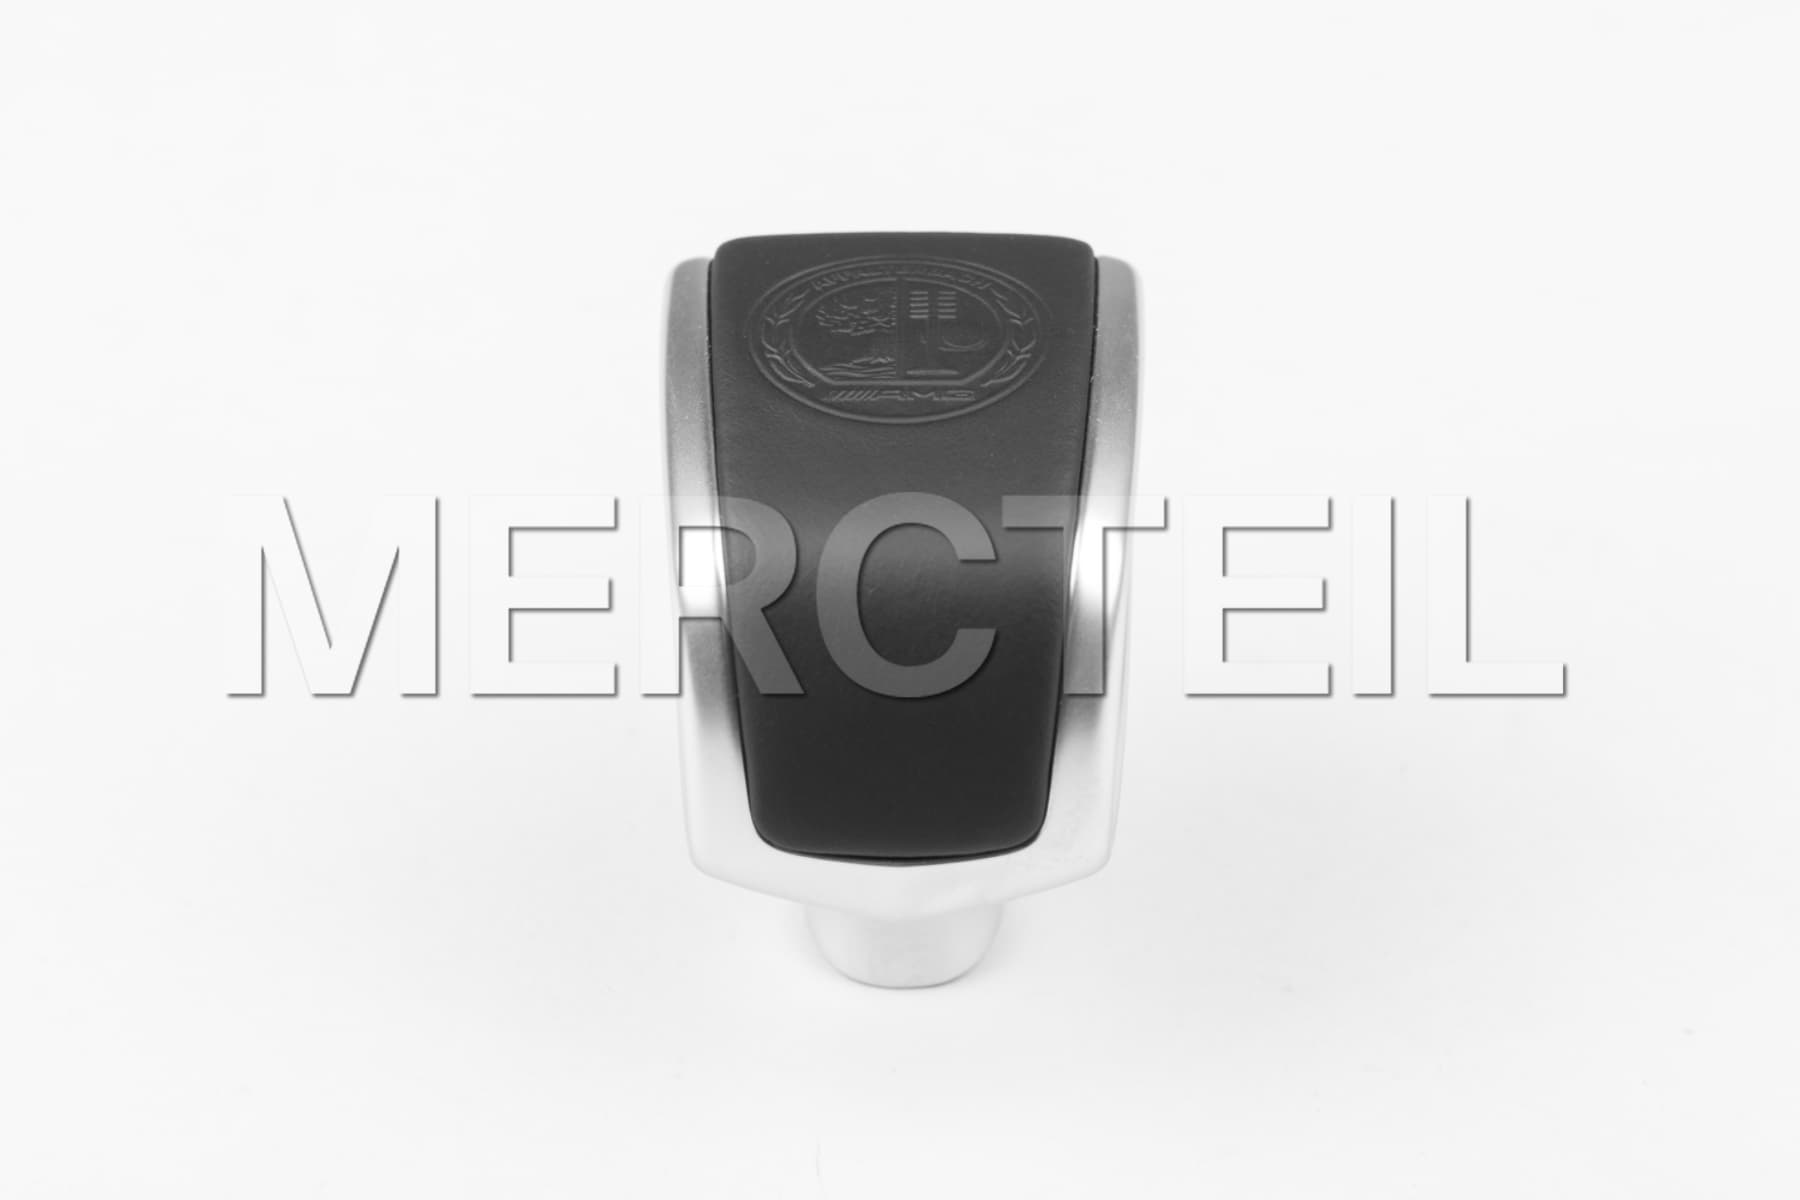 AMG Selector Lever Handle (part number: A21826000009E38)